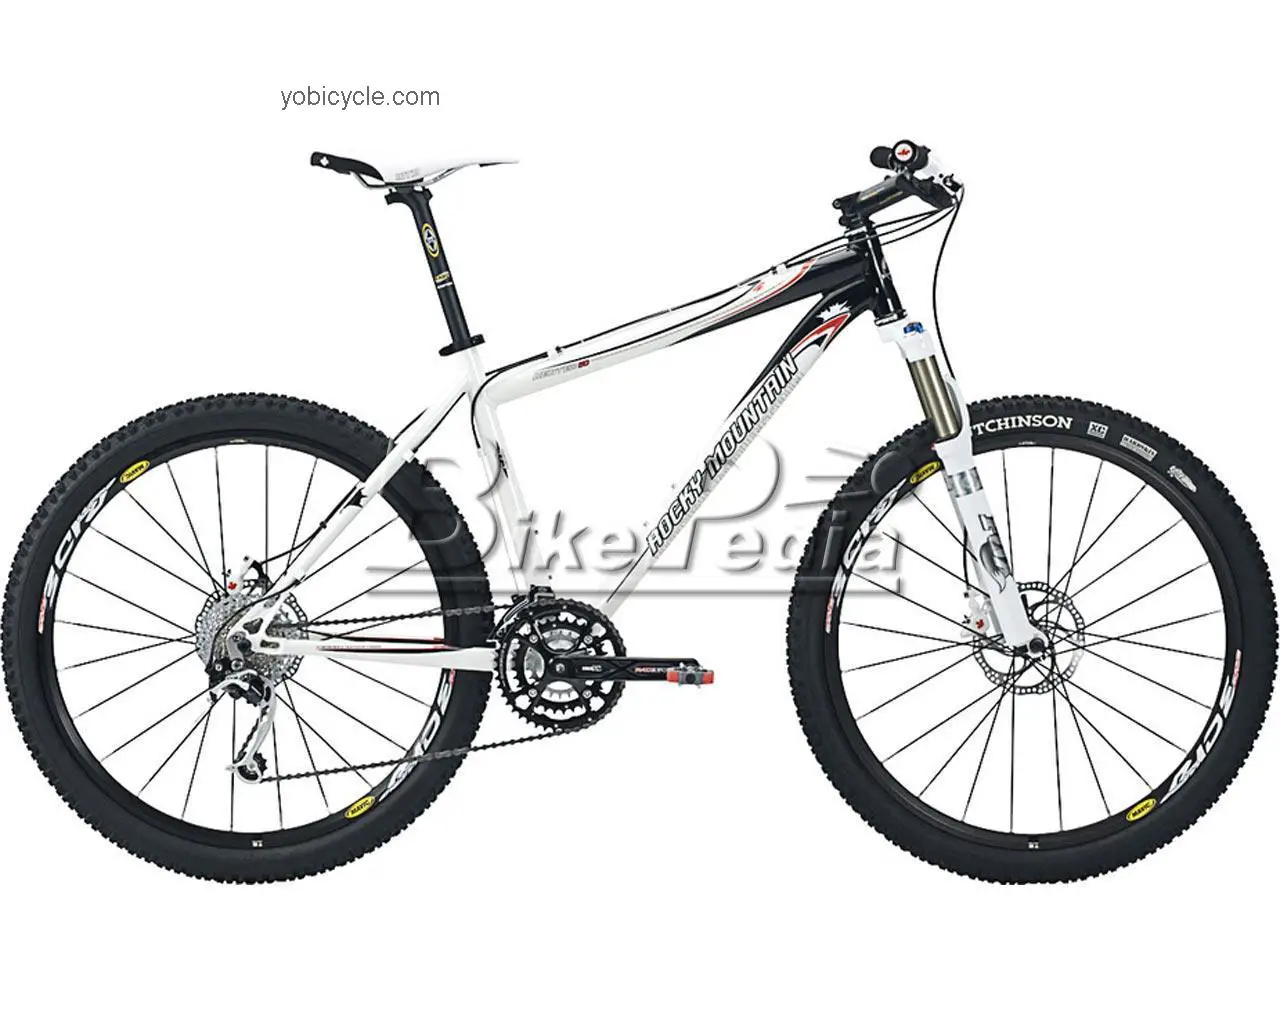 Rocky Mountain Vertex 50 2009 comparison online with competitors